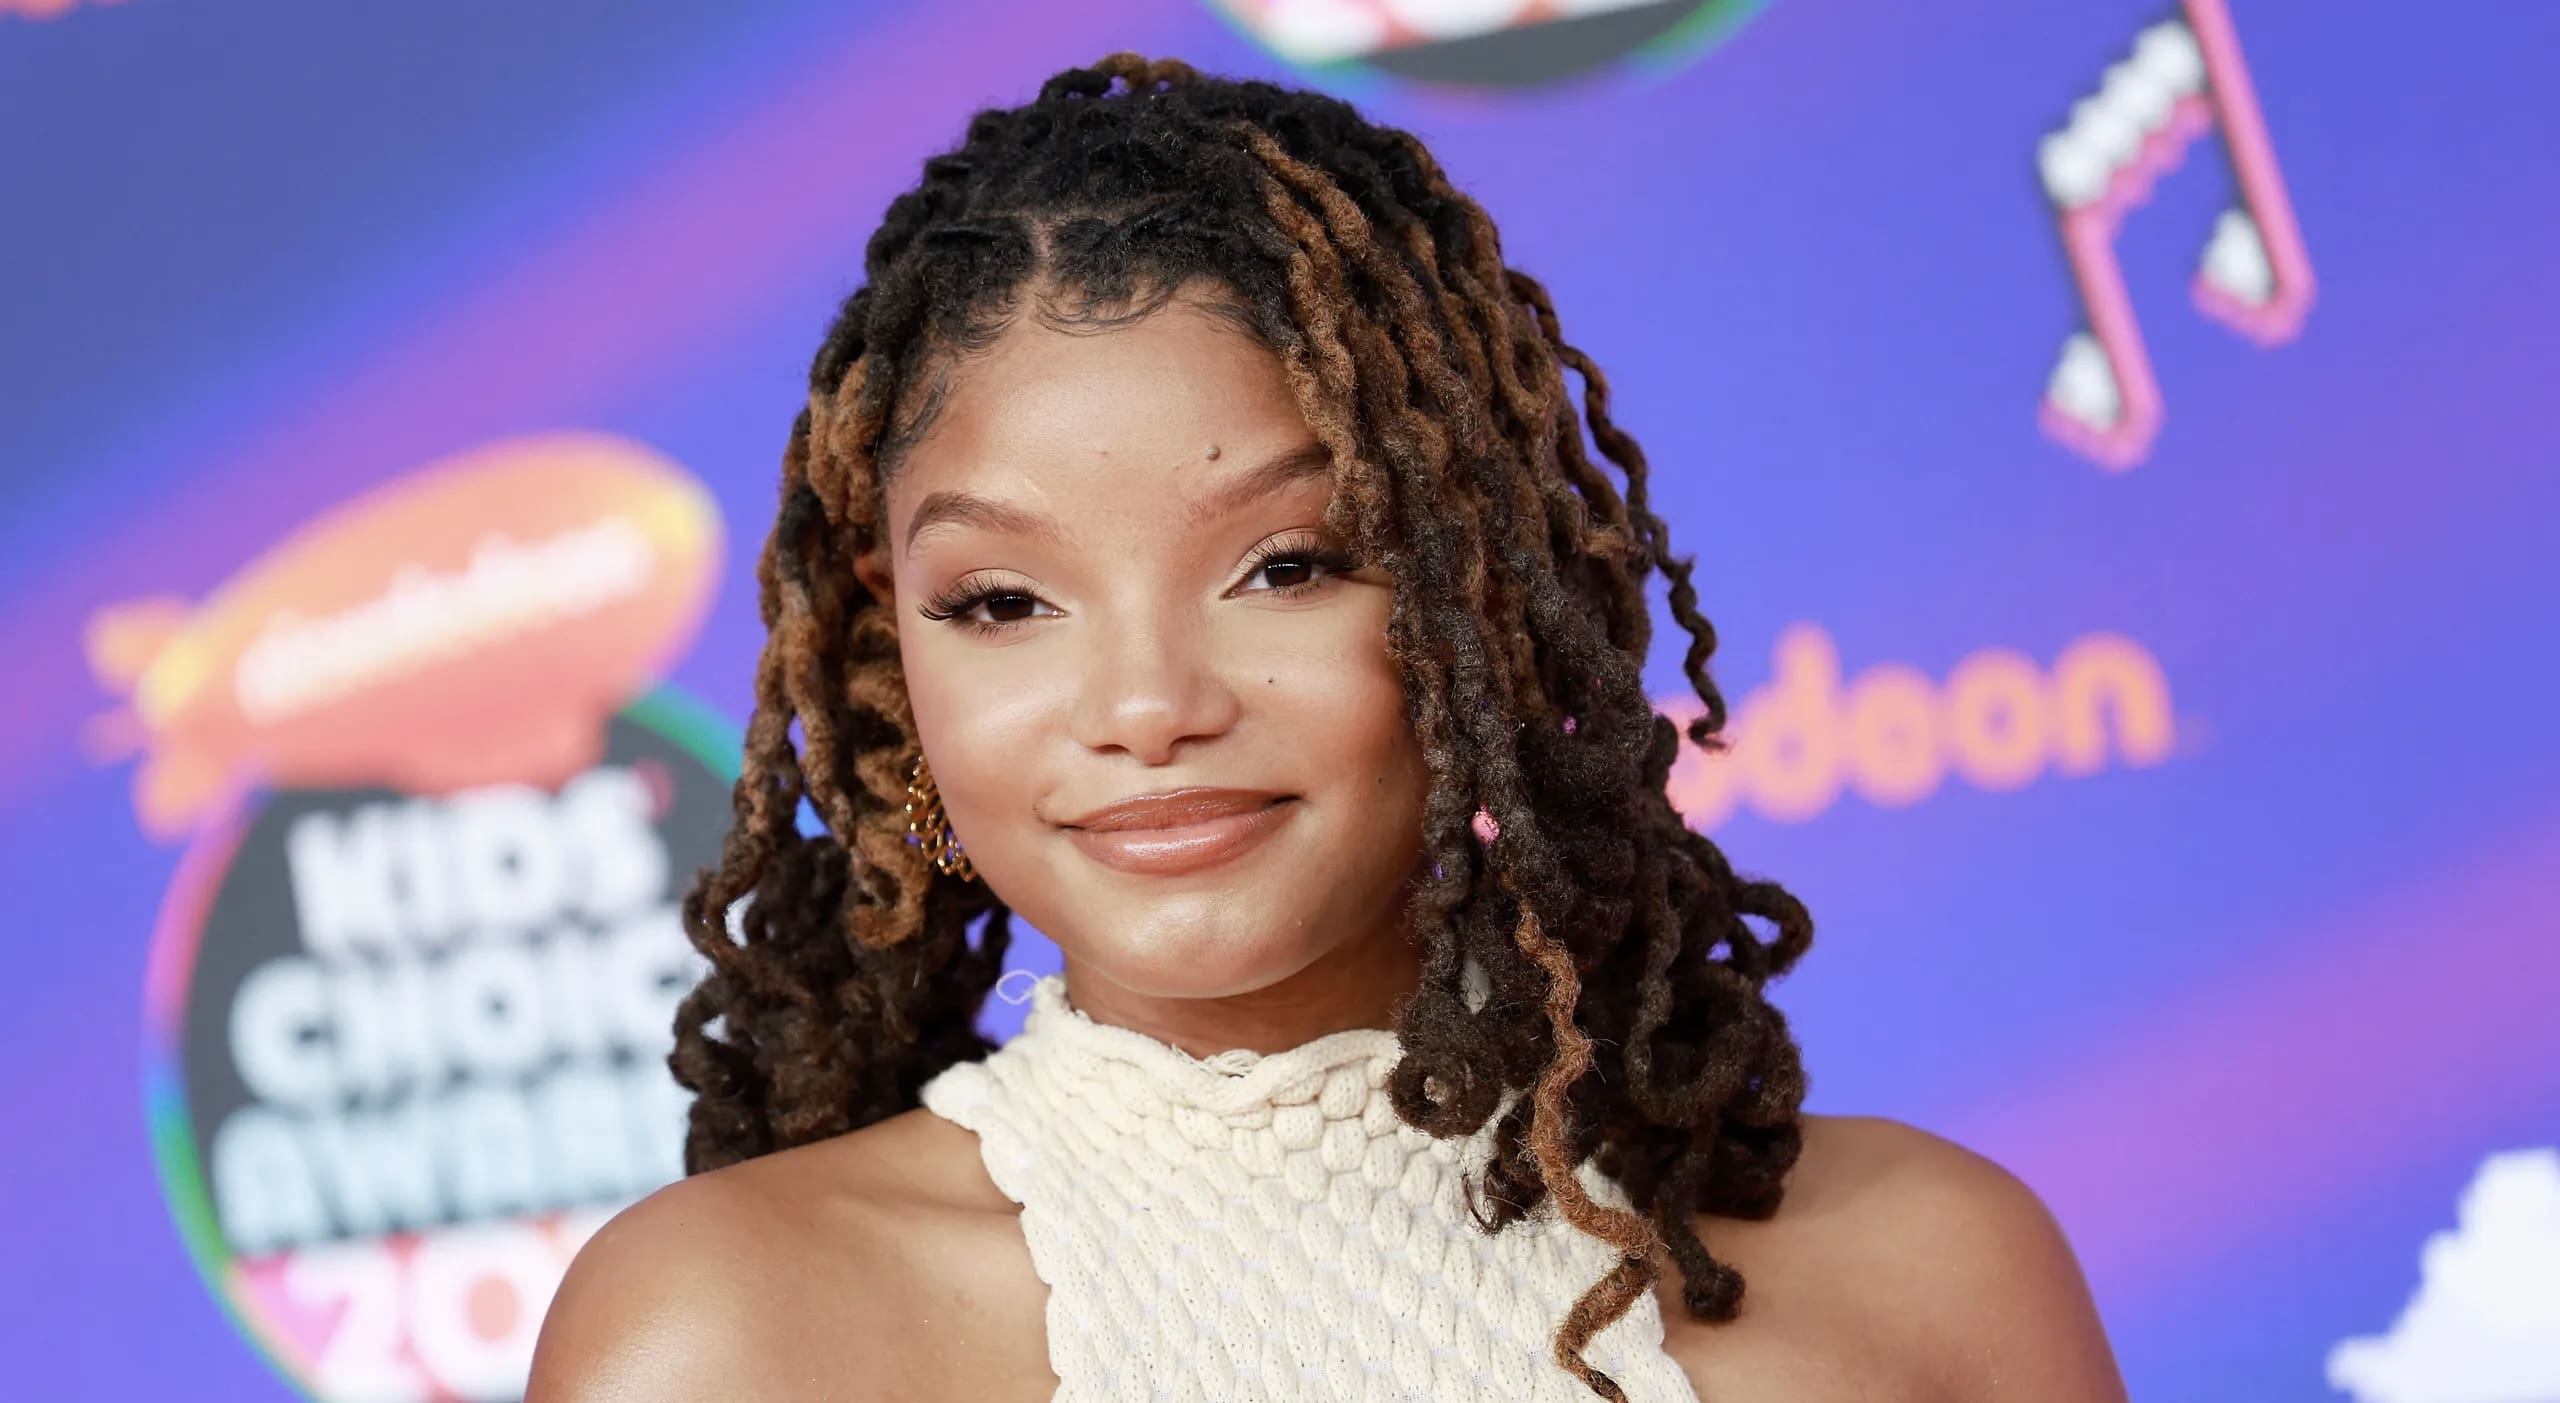 Halle Bailey Shared An Adorable Video Of A Little Fan Who Just Could Not Let Go Of Her At Disney